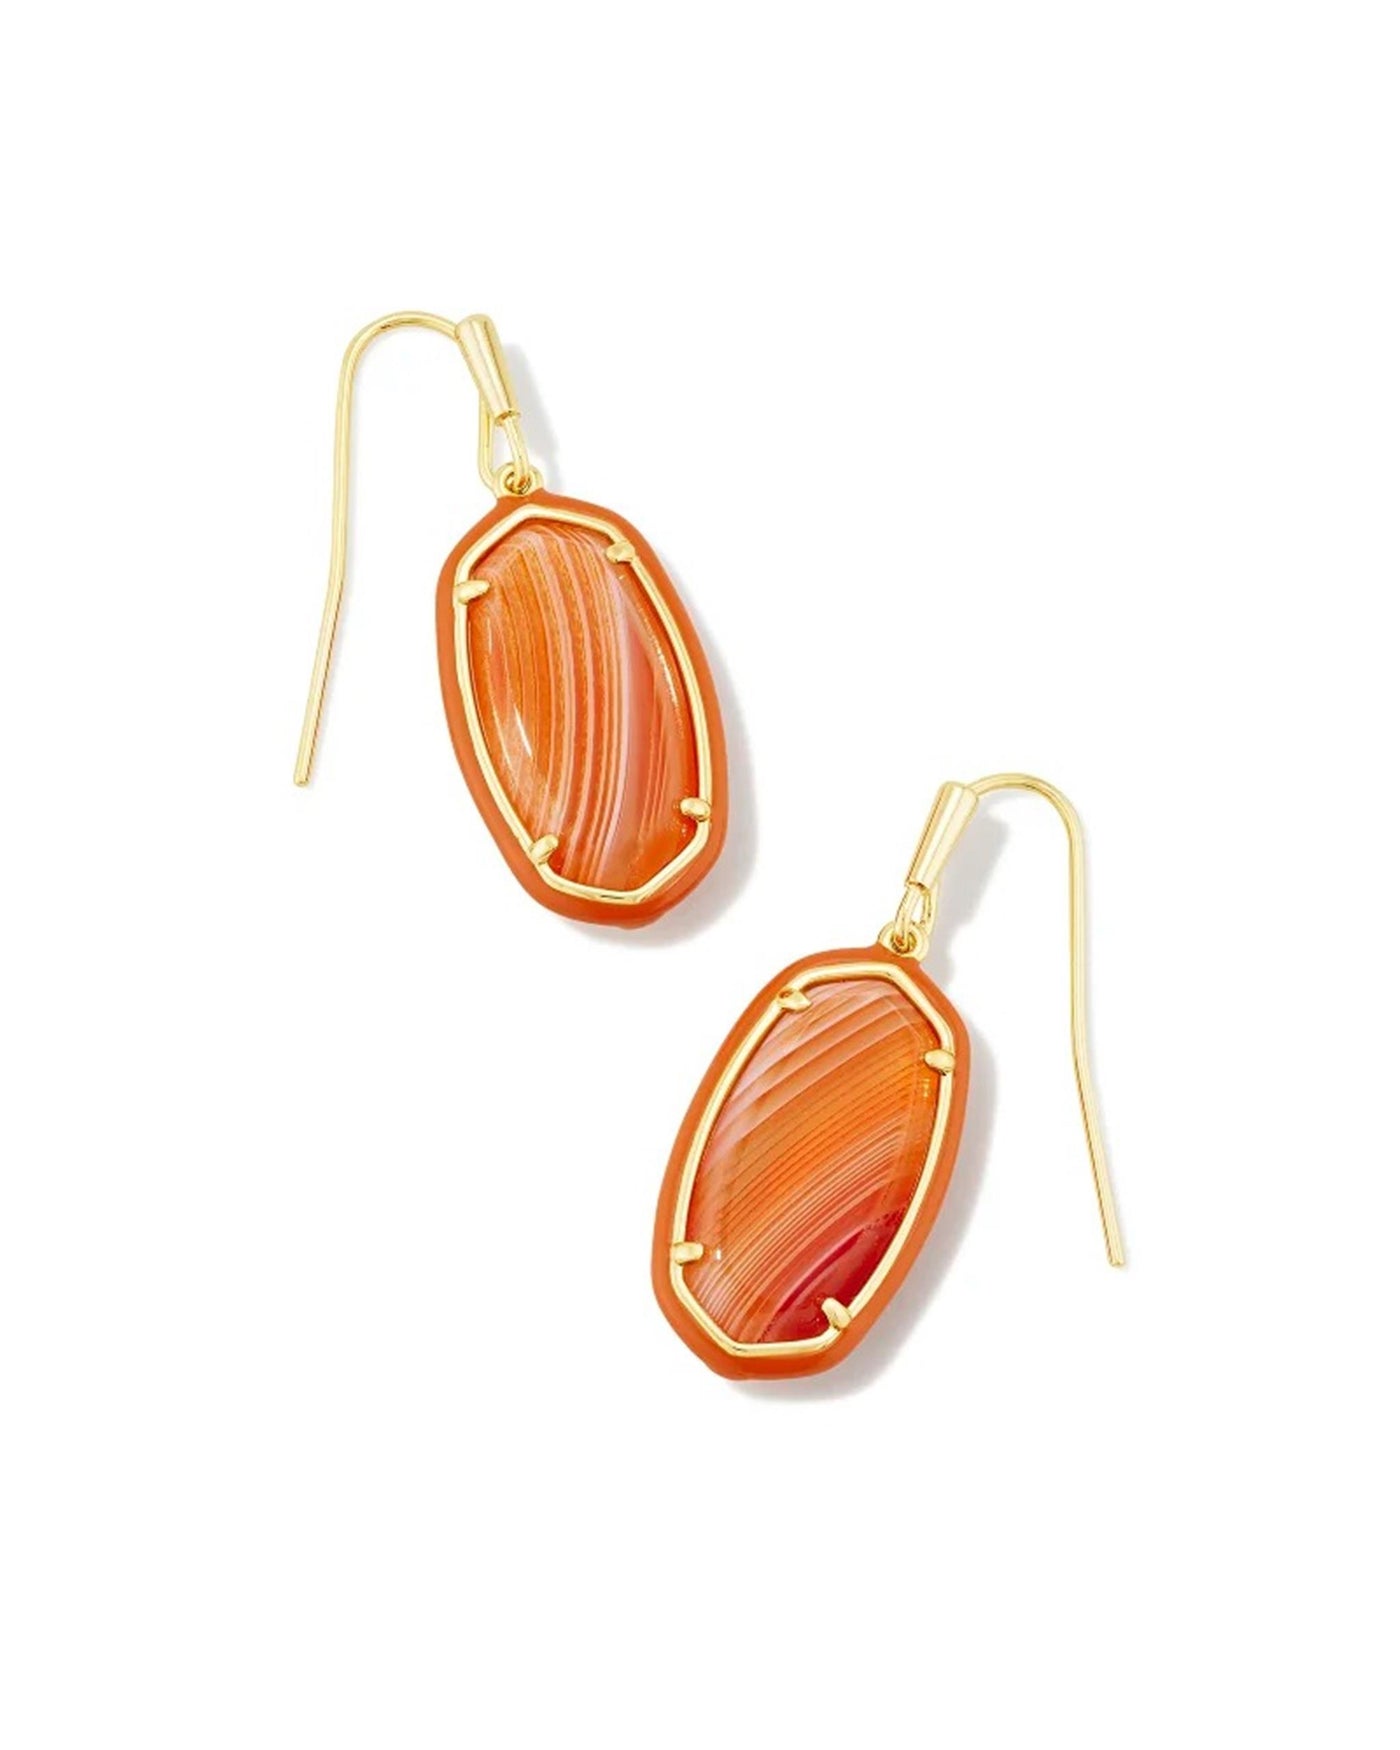 Gold Tone Earrings Featuring Orange Banded Agate by Kendra Scott